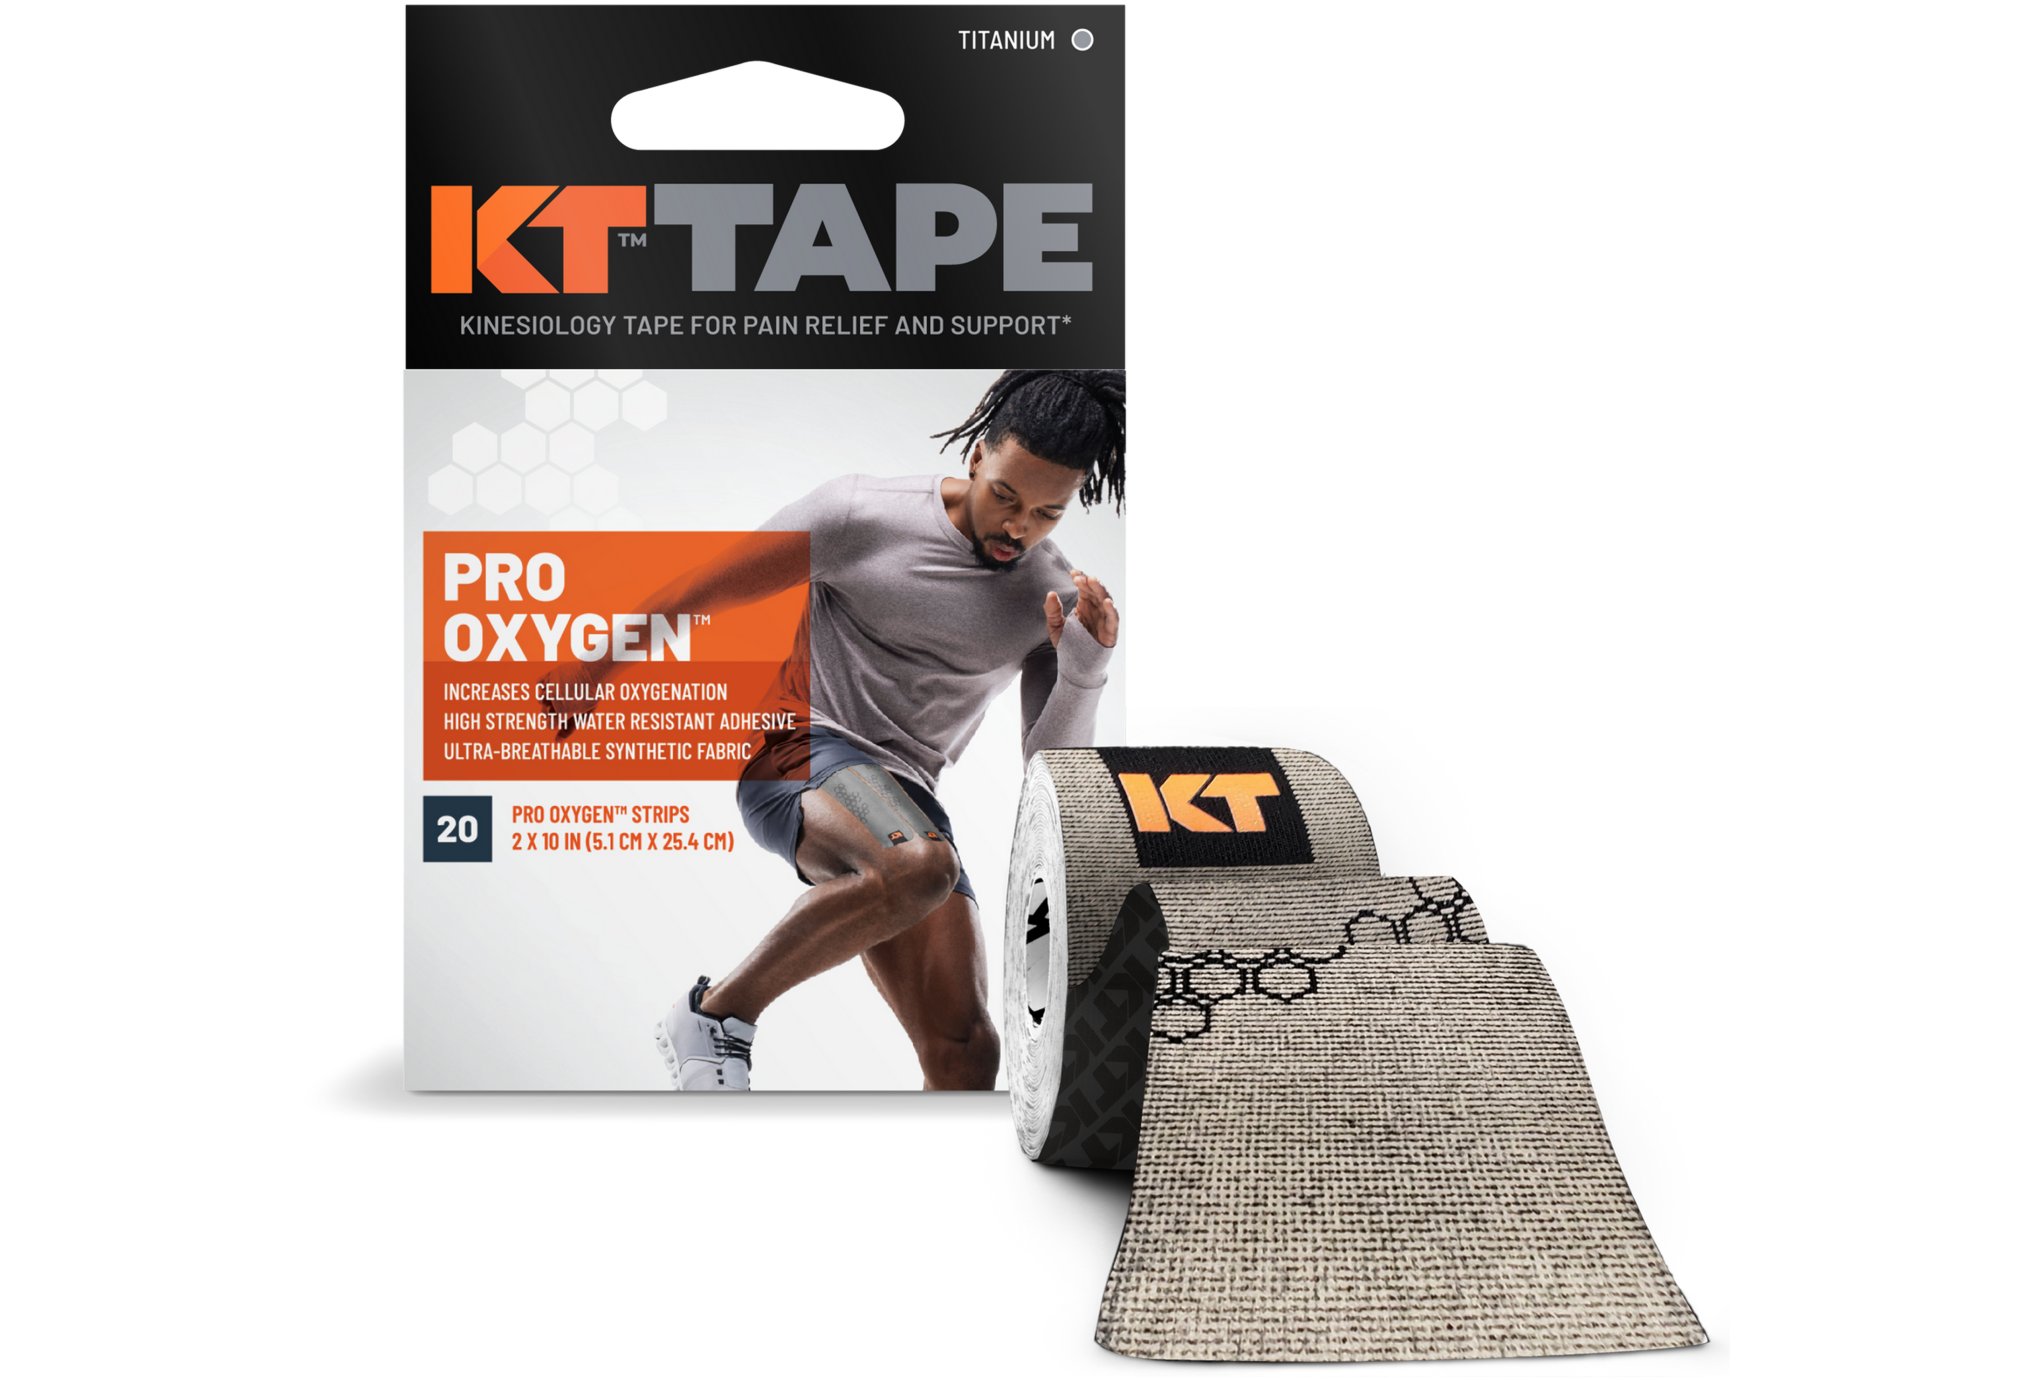 KT Tape Pro Oxygen Protection musculaire & articulaire